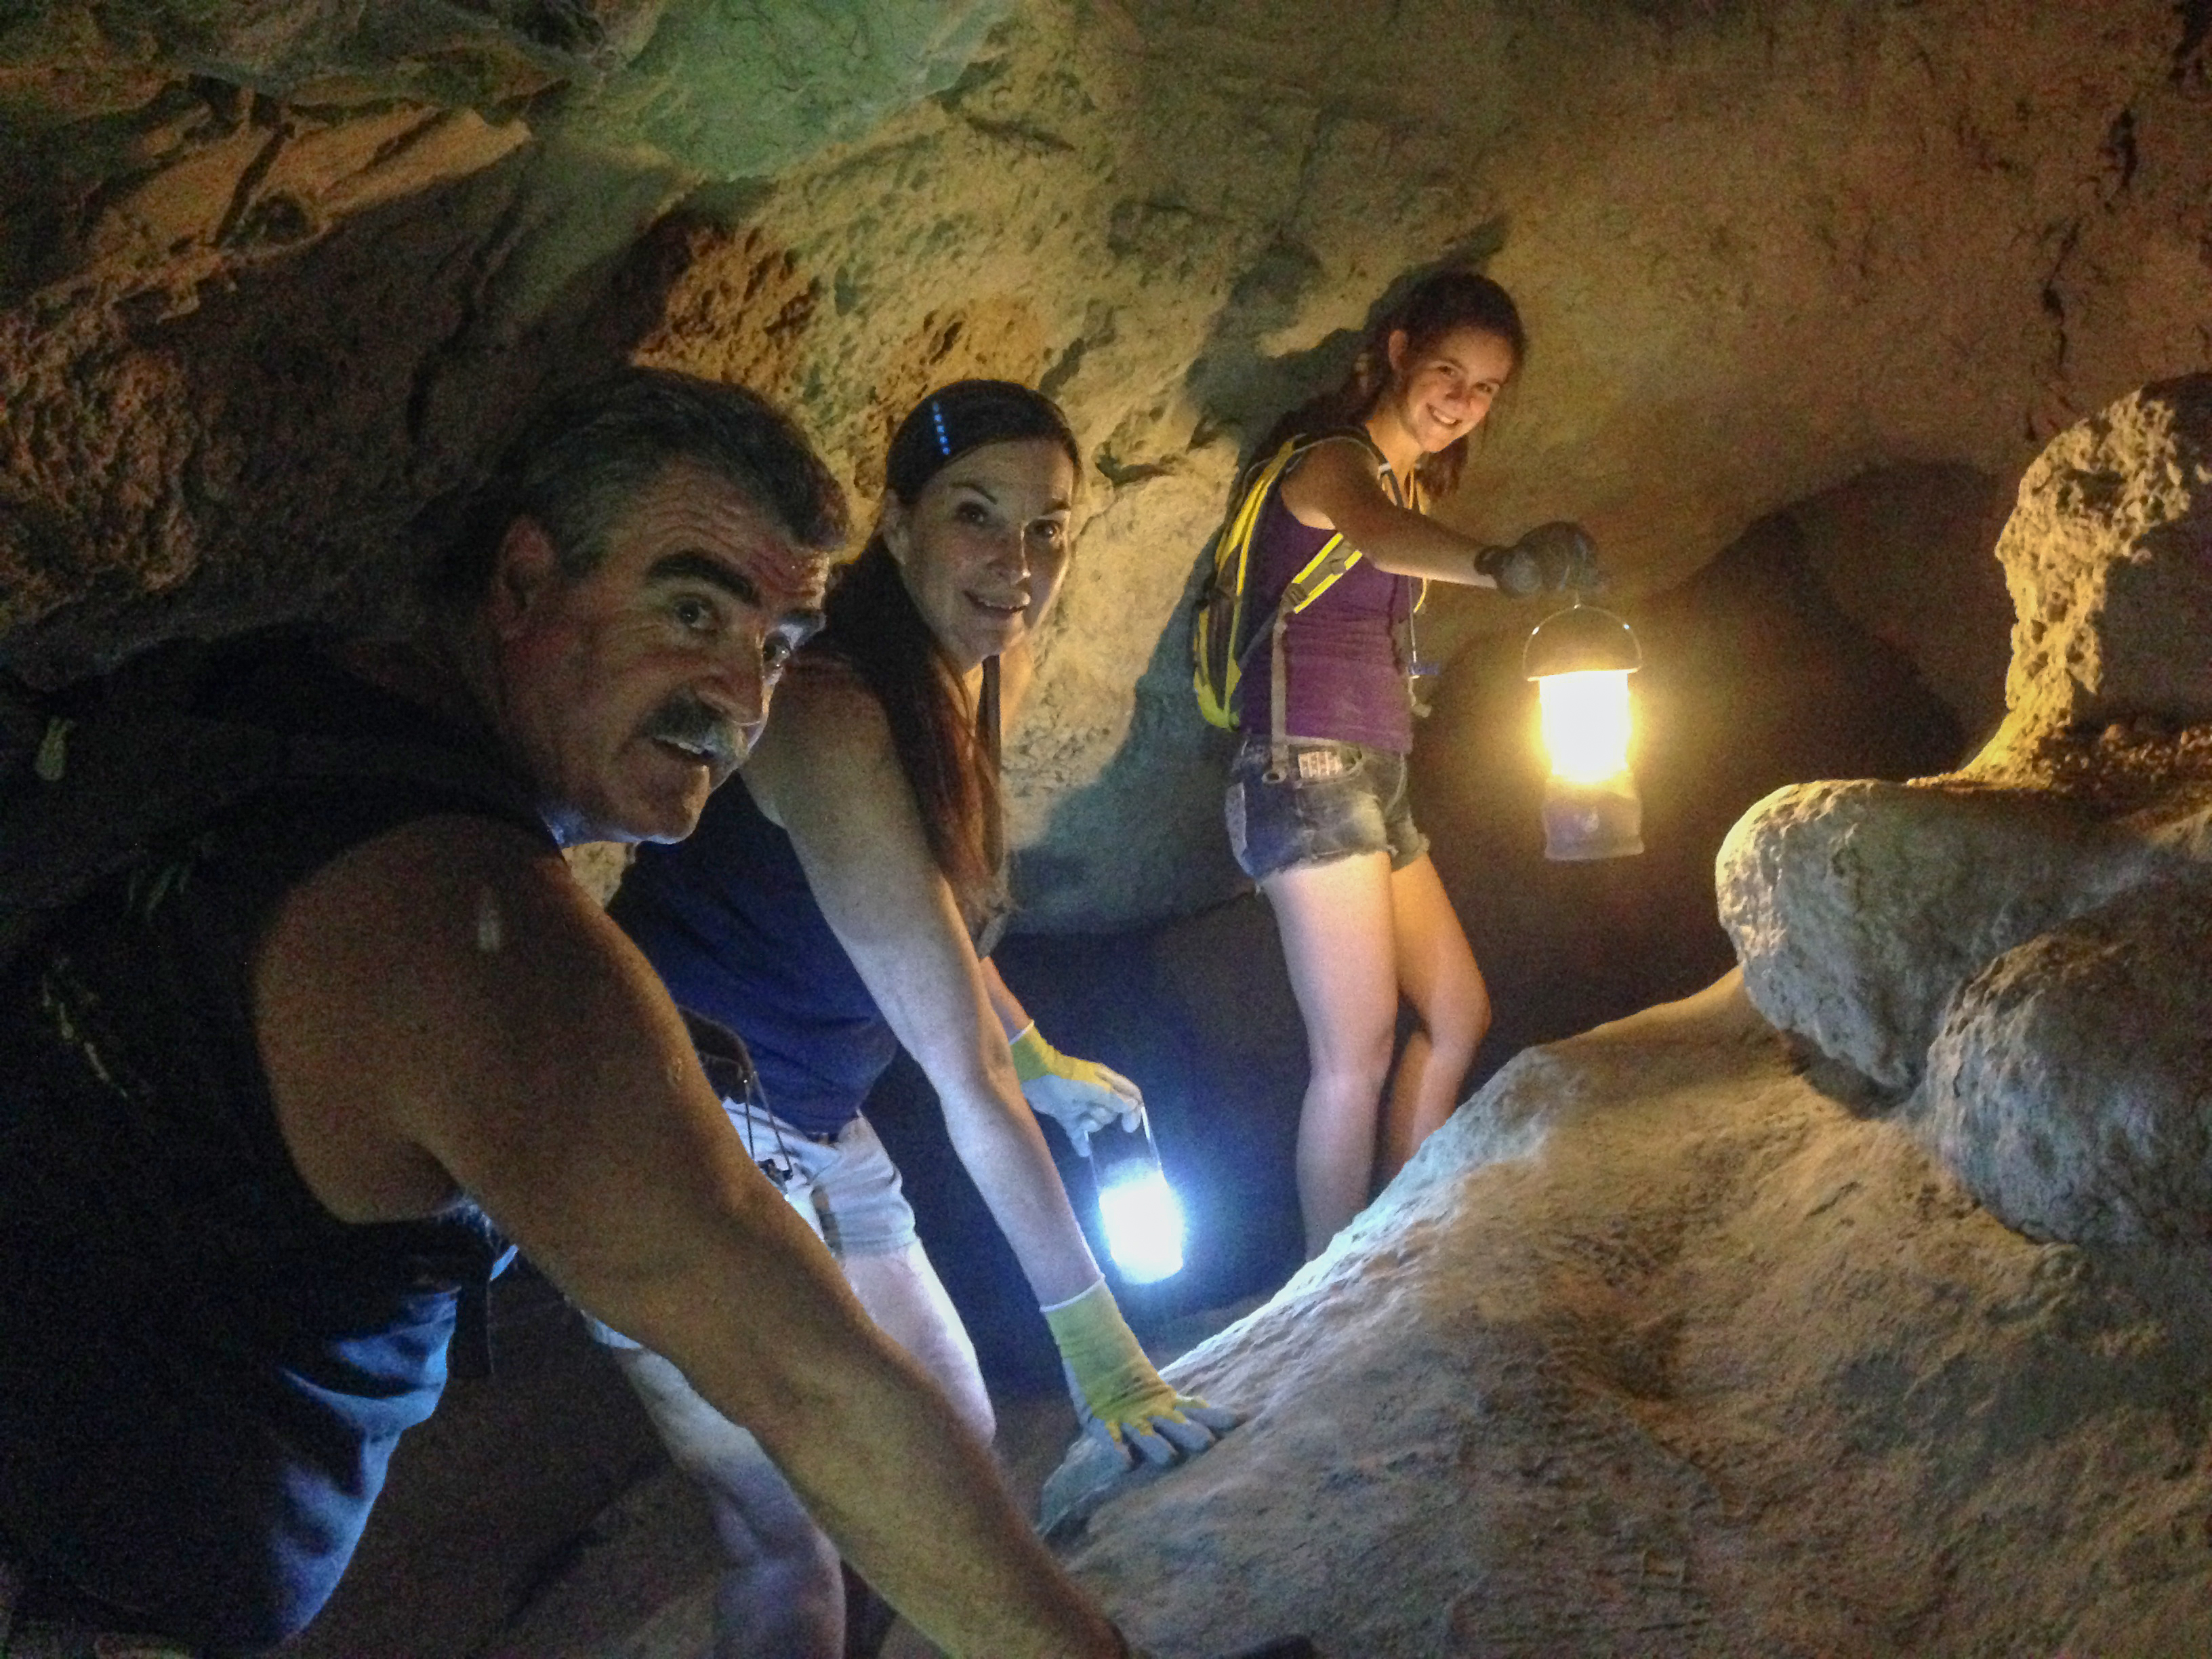 Haley Jones (rear) leads her grandparents, Don and Cher Kelley, into a dark mud cave using lanterns for light.